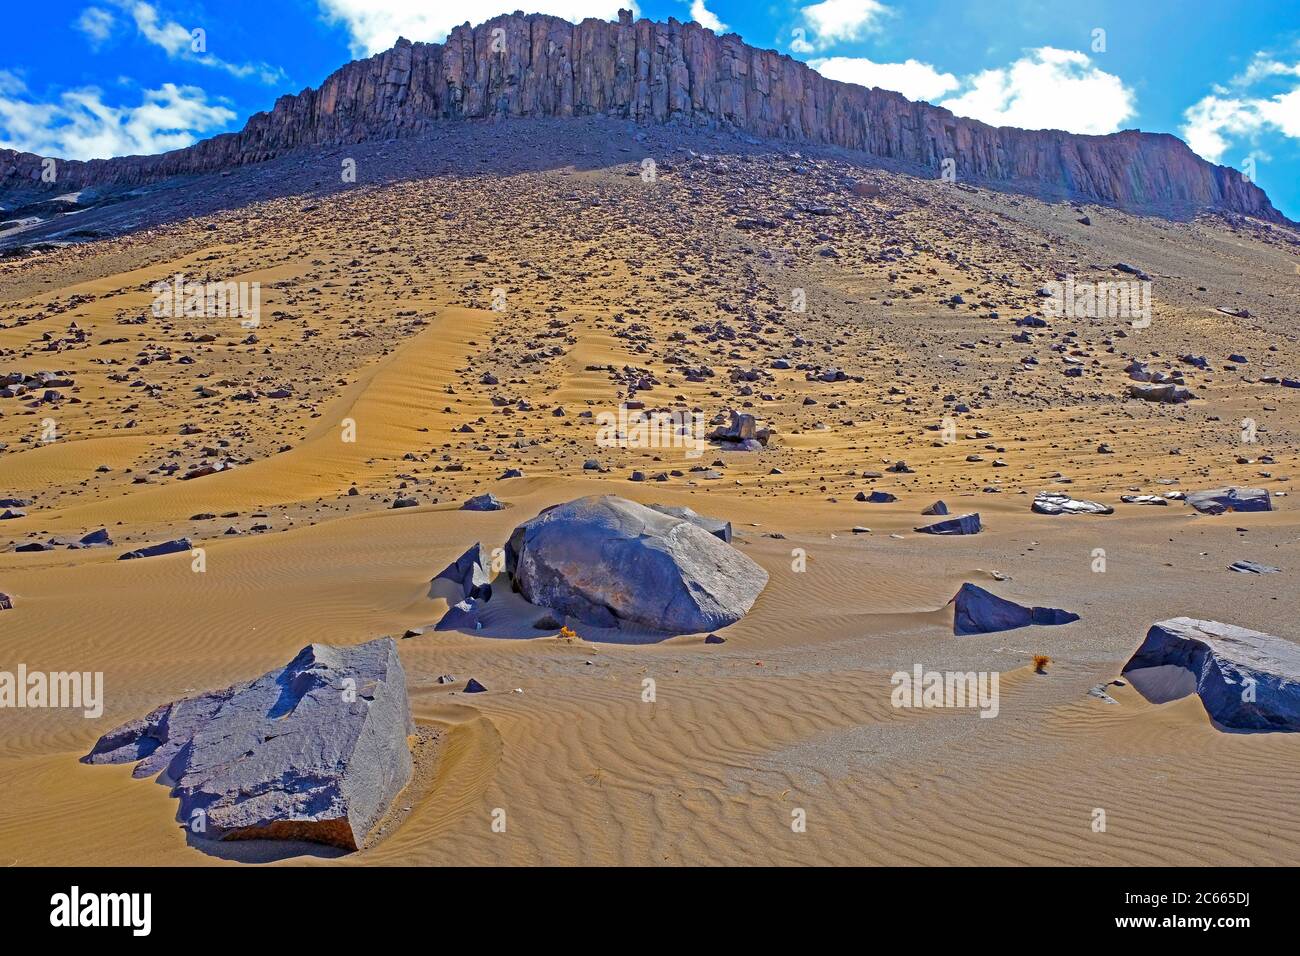 Dune interspersed with boulders on a rocky slope on the border river Oranje between Namibia and South Africa Stock Photo